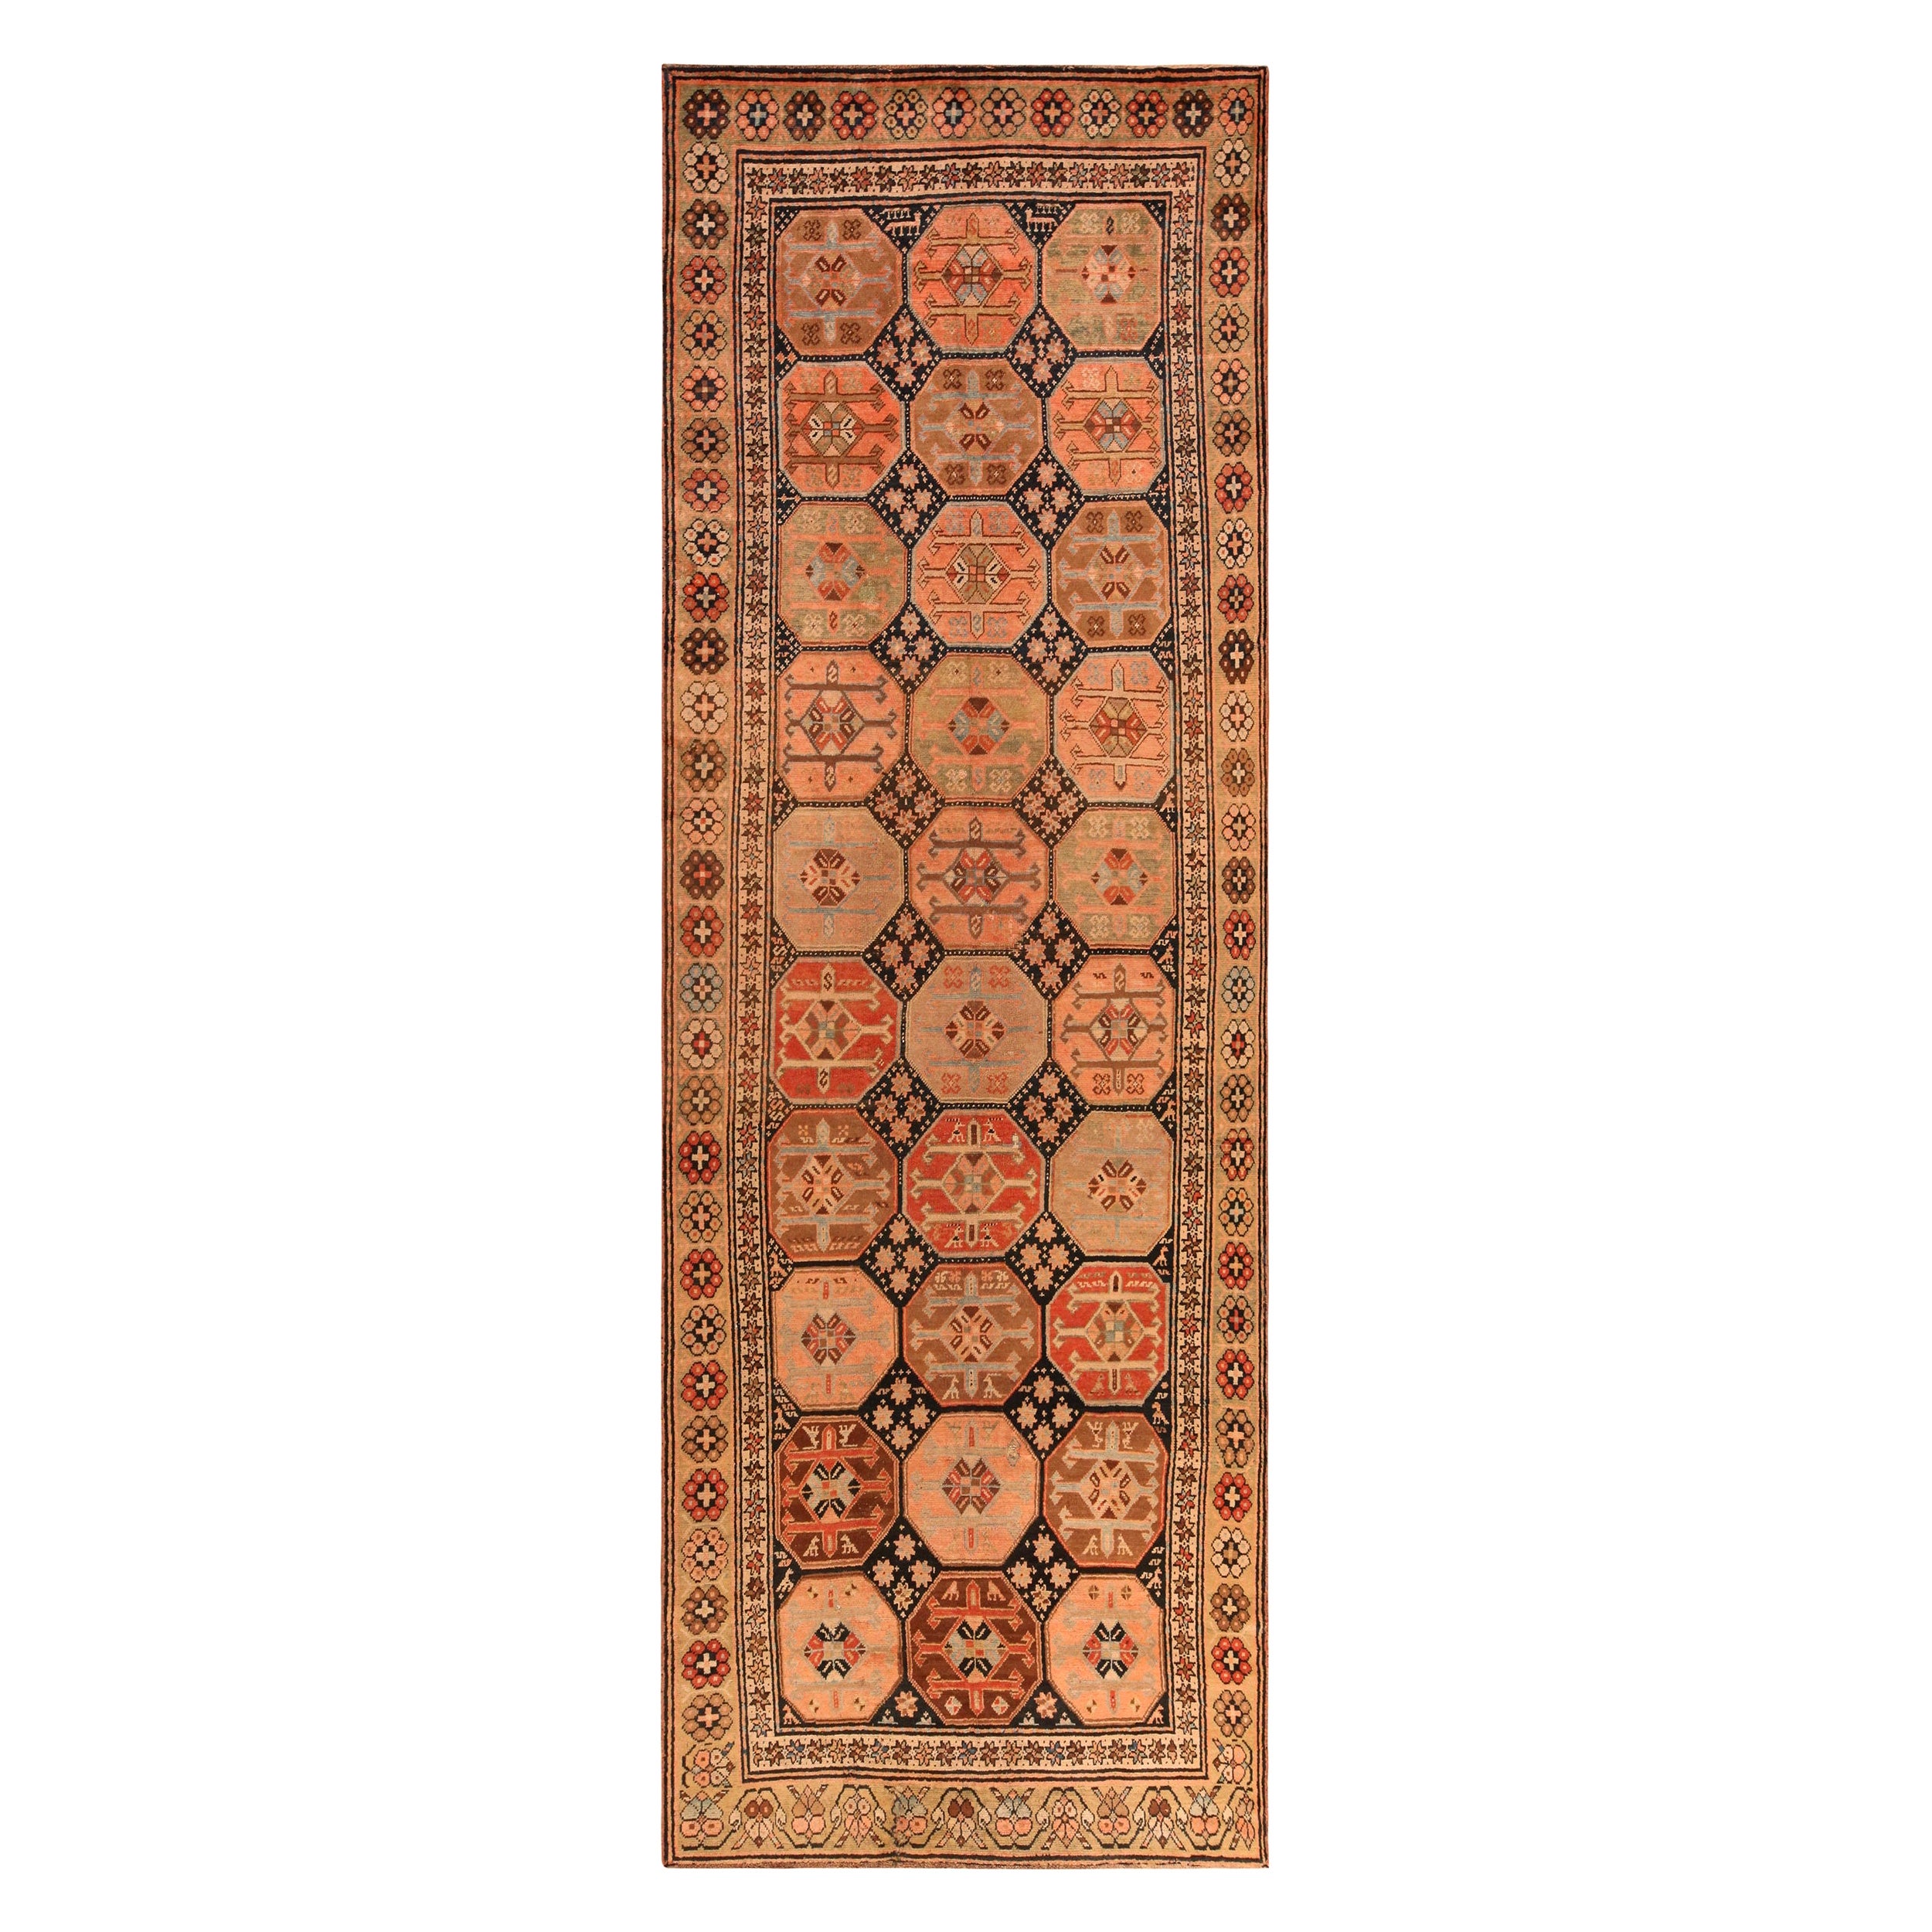 Nazmiyal Collection Antique Caucasian Karabagh Runner. 4 ft 1 in x 11 ft 7 in